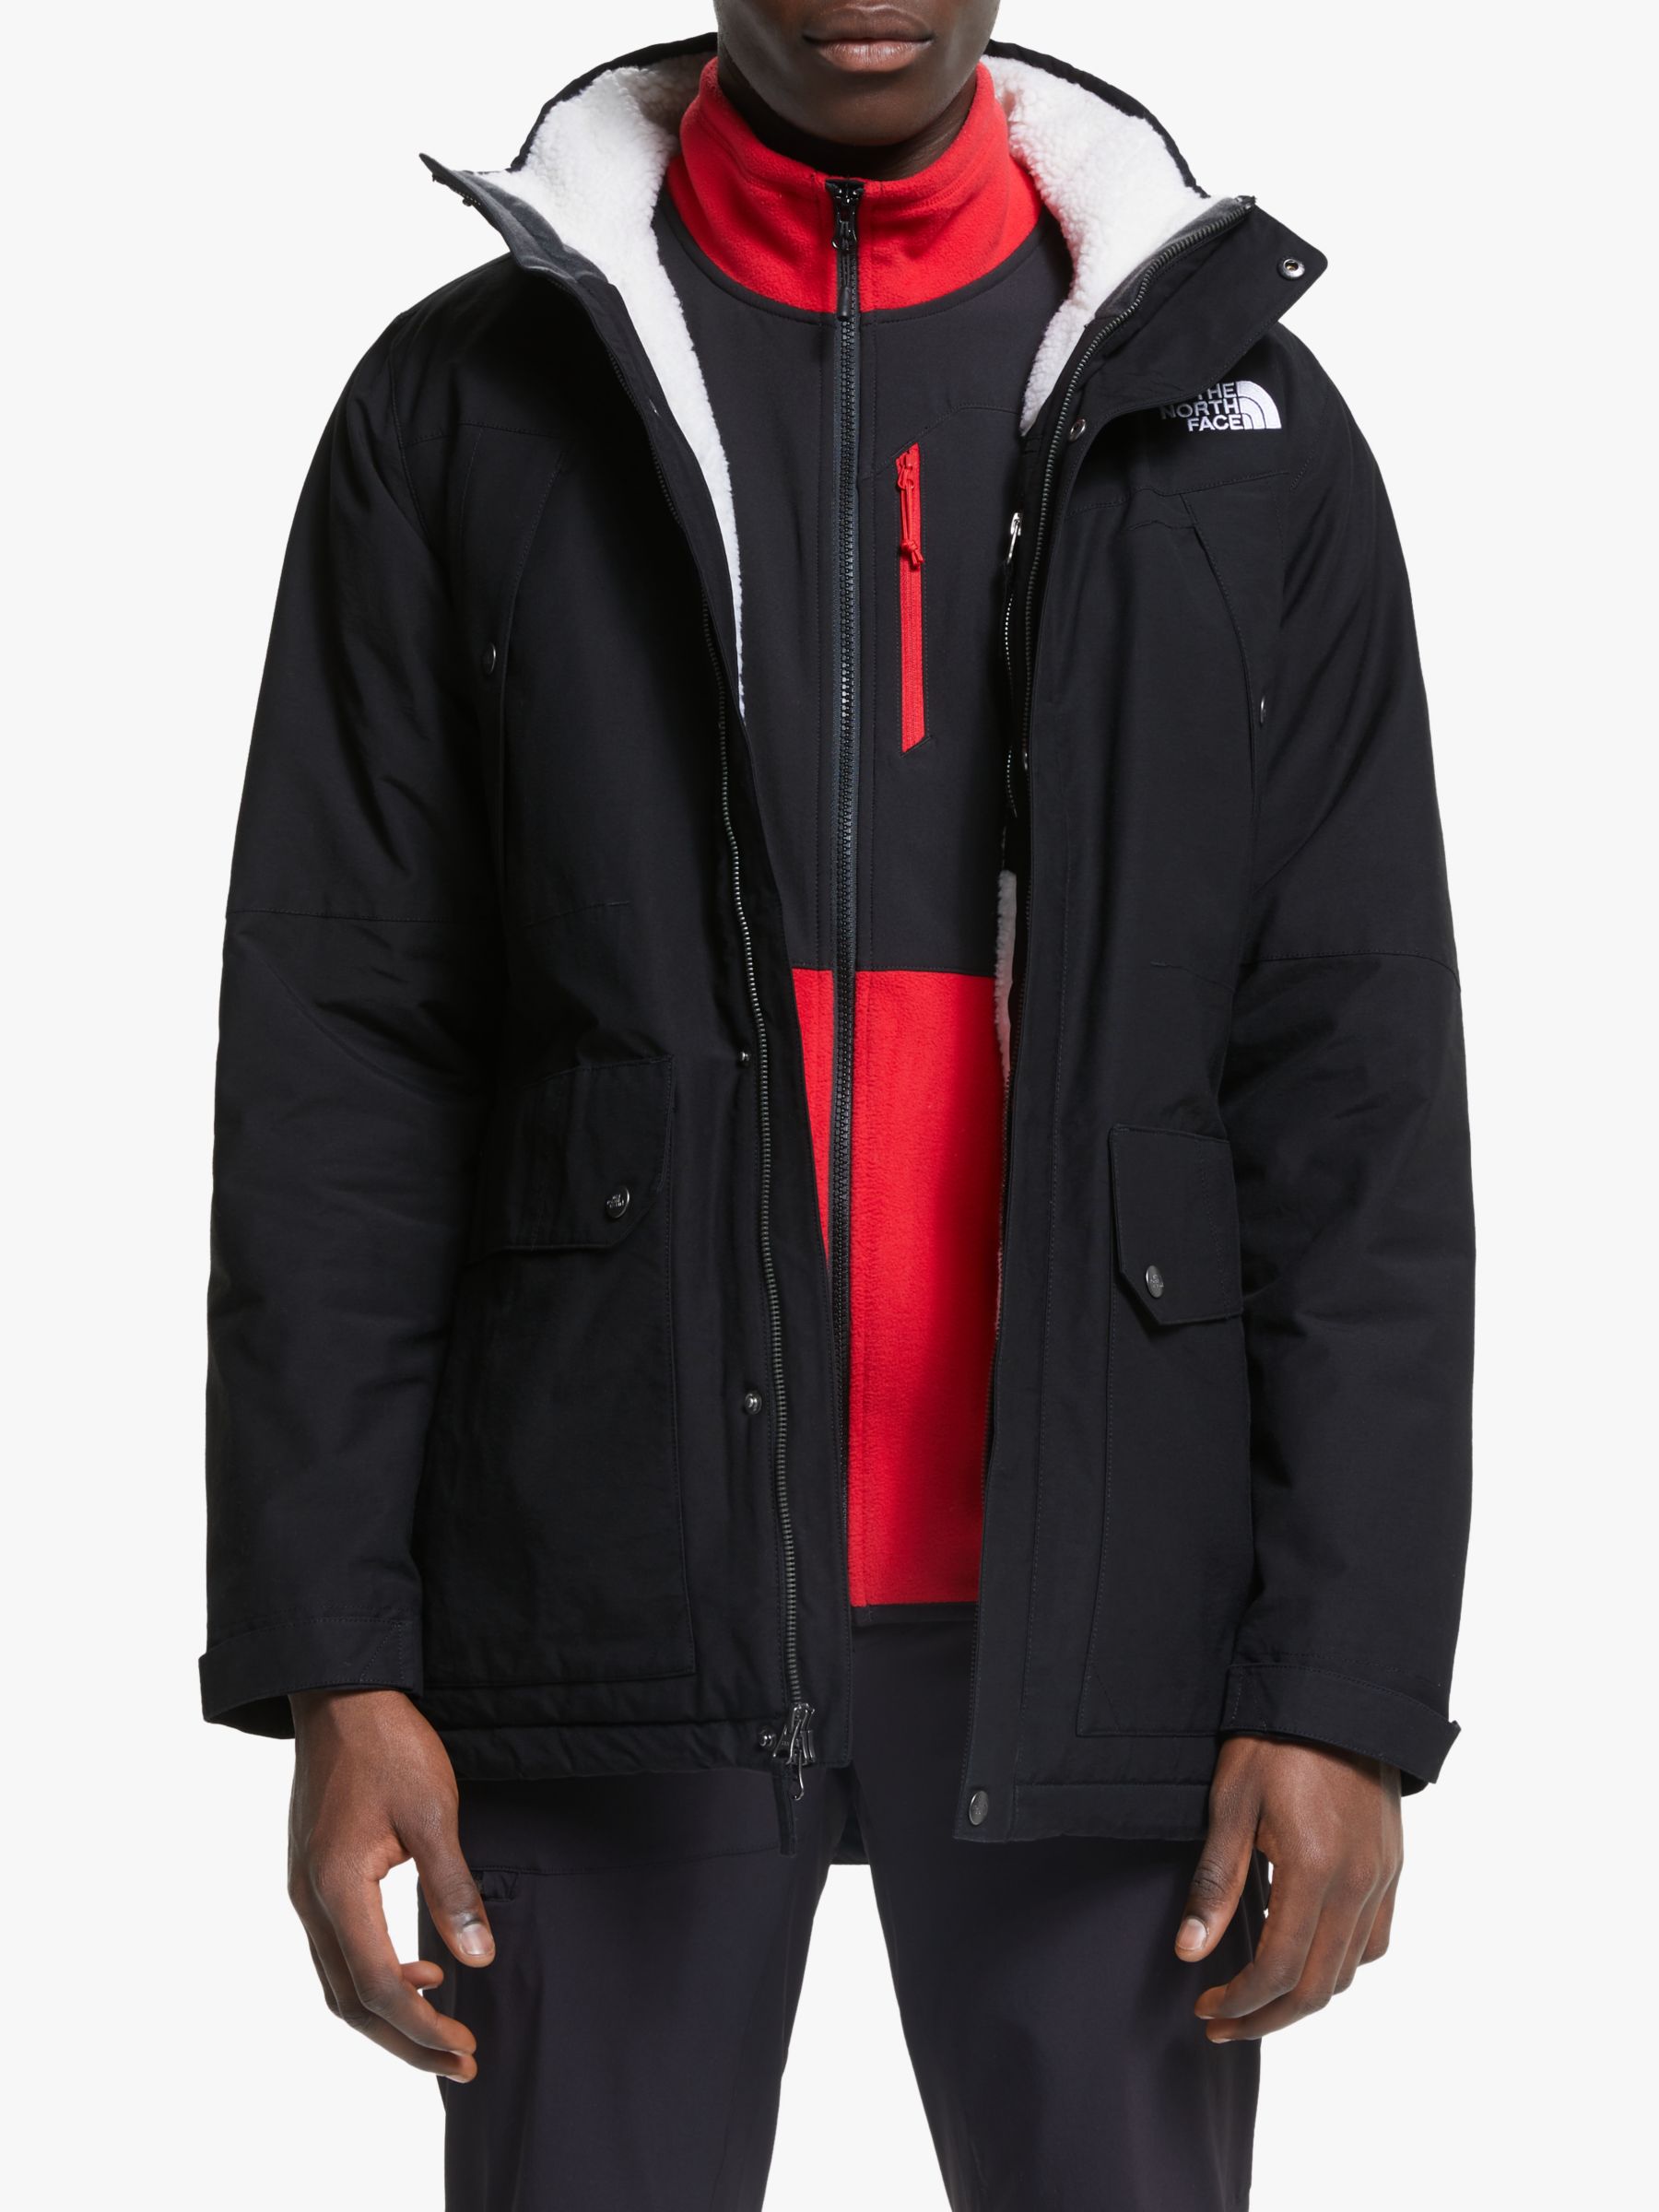 north face men's insulated jacket